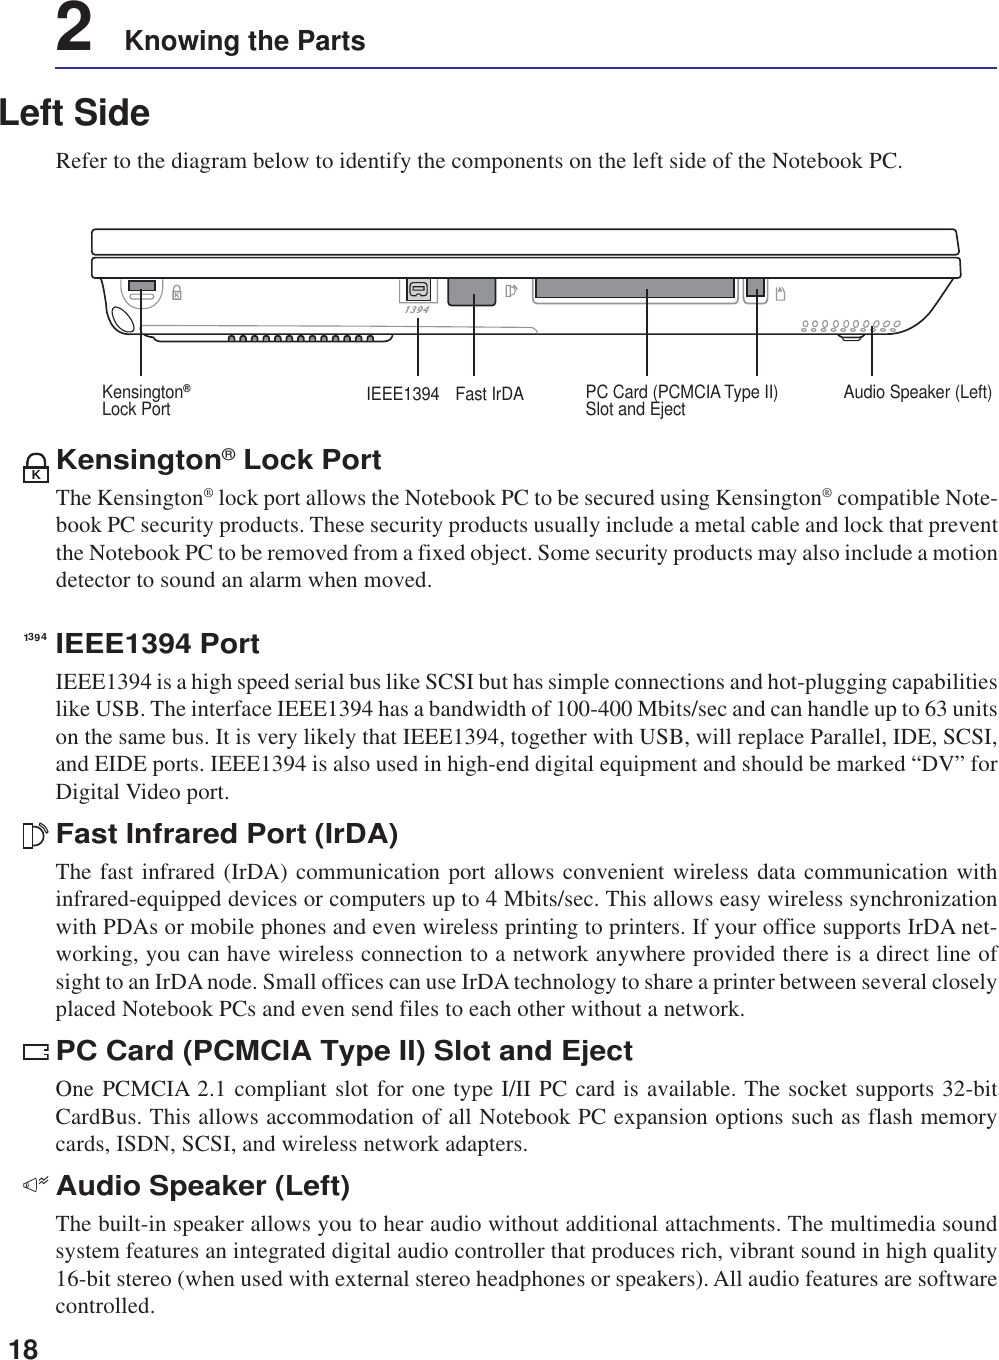 182    Knowing the PartsLeft SideRefer to the diagram below to identify the components on the left side of the Notebook PC.IEEE1394 PortIEEE1394 is a high speed serial bus like SCSI but has simple connections and hot-plugging capabilitieslike USB. The interface IEEE1394 has a bandwidth of 100-400 Mbits/sec and can handle up to 63 unitson the same bus. It is very likely that IEEE1394, together with USB, will replace Parallel, IDE, SCSI,and EIDE ports. IEEE1394 is also used in high-end digital equipment and should be marked “DV” forDigital Video port.Fast Infrared Port (IrDA)The fast infrared (IrDA) communication port allows convenient wireless data communication withinfrared-equipped devices or computers up to 4 Mbits/sec. This allows easy wireless synchronizationwith PDAs or mobile phones and even wireless printing to printers. If your office supports IrDA net-working, you can have wireless connection to a network anywhere provided there is a direct line ofsight to an IrDA node. Small offices can use IrDA technology to share a printer between several closelyplaced Notebook PCs and even send files to each other without a network.PC Card (PCMCIA Type II) Slot and EjectOne PCMCIA 2.1 compliant slot for one type I/II PC card is available. The socket supports 32-bitCardBus. This allows accommodation of all Notebook PC expansion options such as flash memorycards, ISDN, SCSI, and wireless network adapters.Audio Speaker (Left)The built-in speaker allows you to hear audio without additional attachments. The multimedia soundsystem features an integrated digital audio controller that produces rich, vibrant sound in high quality16-bit stereo (when used with external stereo headphones or speakers). All audio features are softwarecontrolled.1394KKensington® Lock PortThe Kensington® lock port allows the Notebook PC to be secured using Kensington® compatible Note-book PC security products. These security products usually include a metal cable and lock that preventthe Notebook PC to be removed from a fixed object. Some security products may also include a motiondetector to sound an alarm when moved.Audio Speaker (Left)Fast IrDAIEEE1394 PC Card (PCMCIA Type II)Slot and EjectKensington®Lock Port